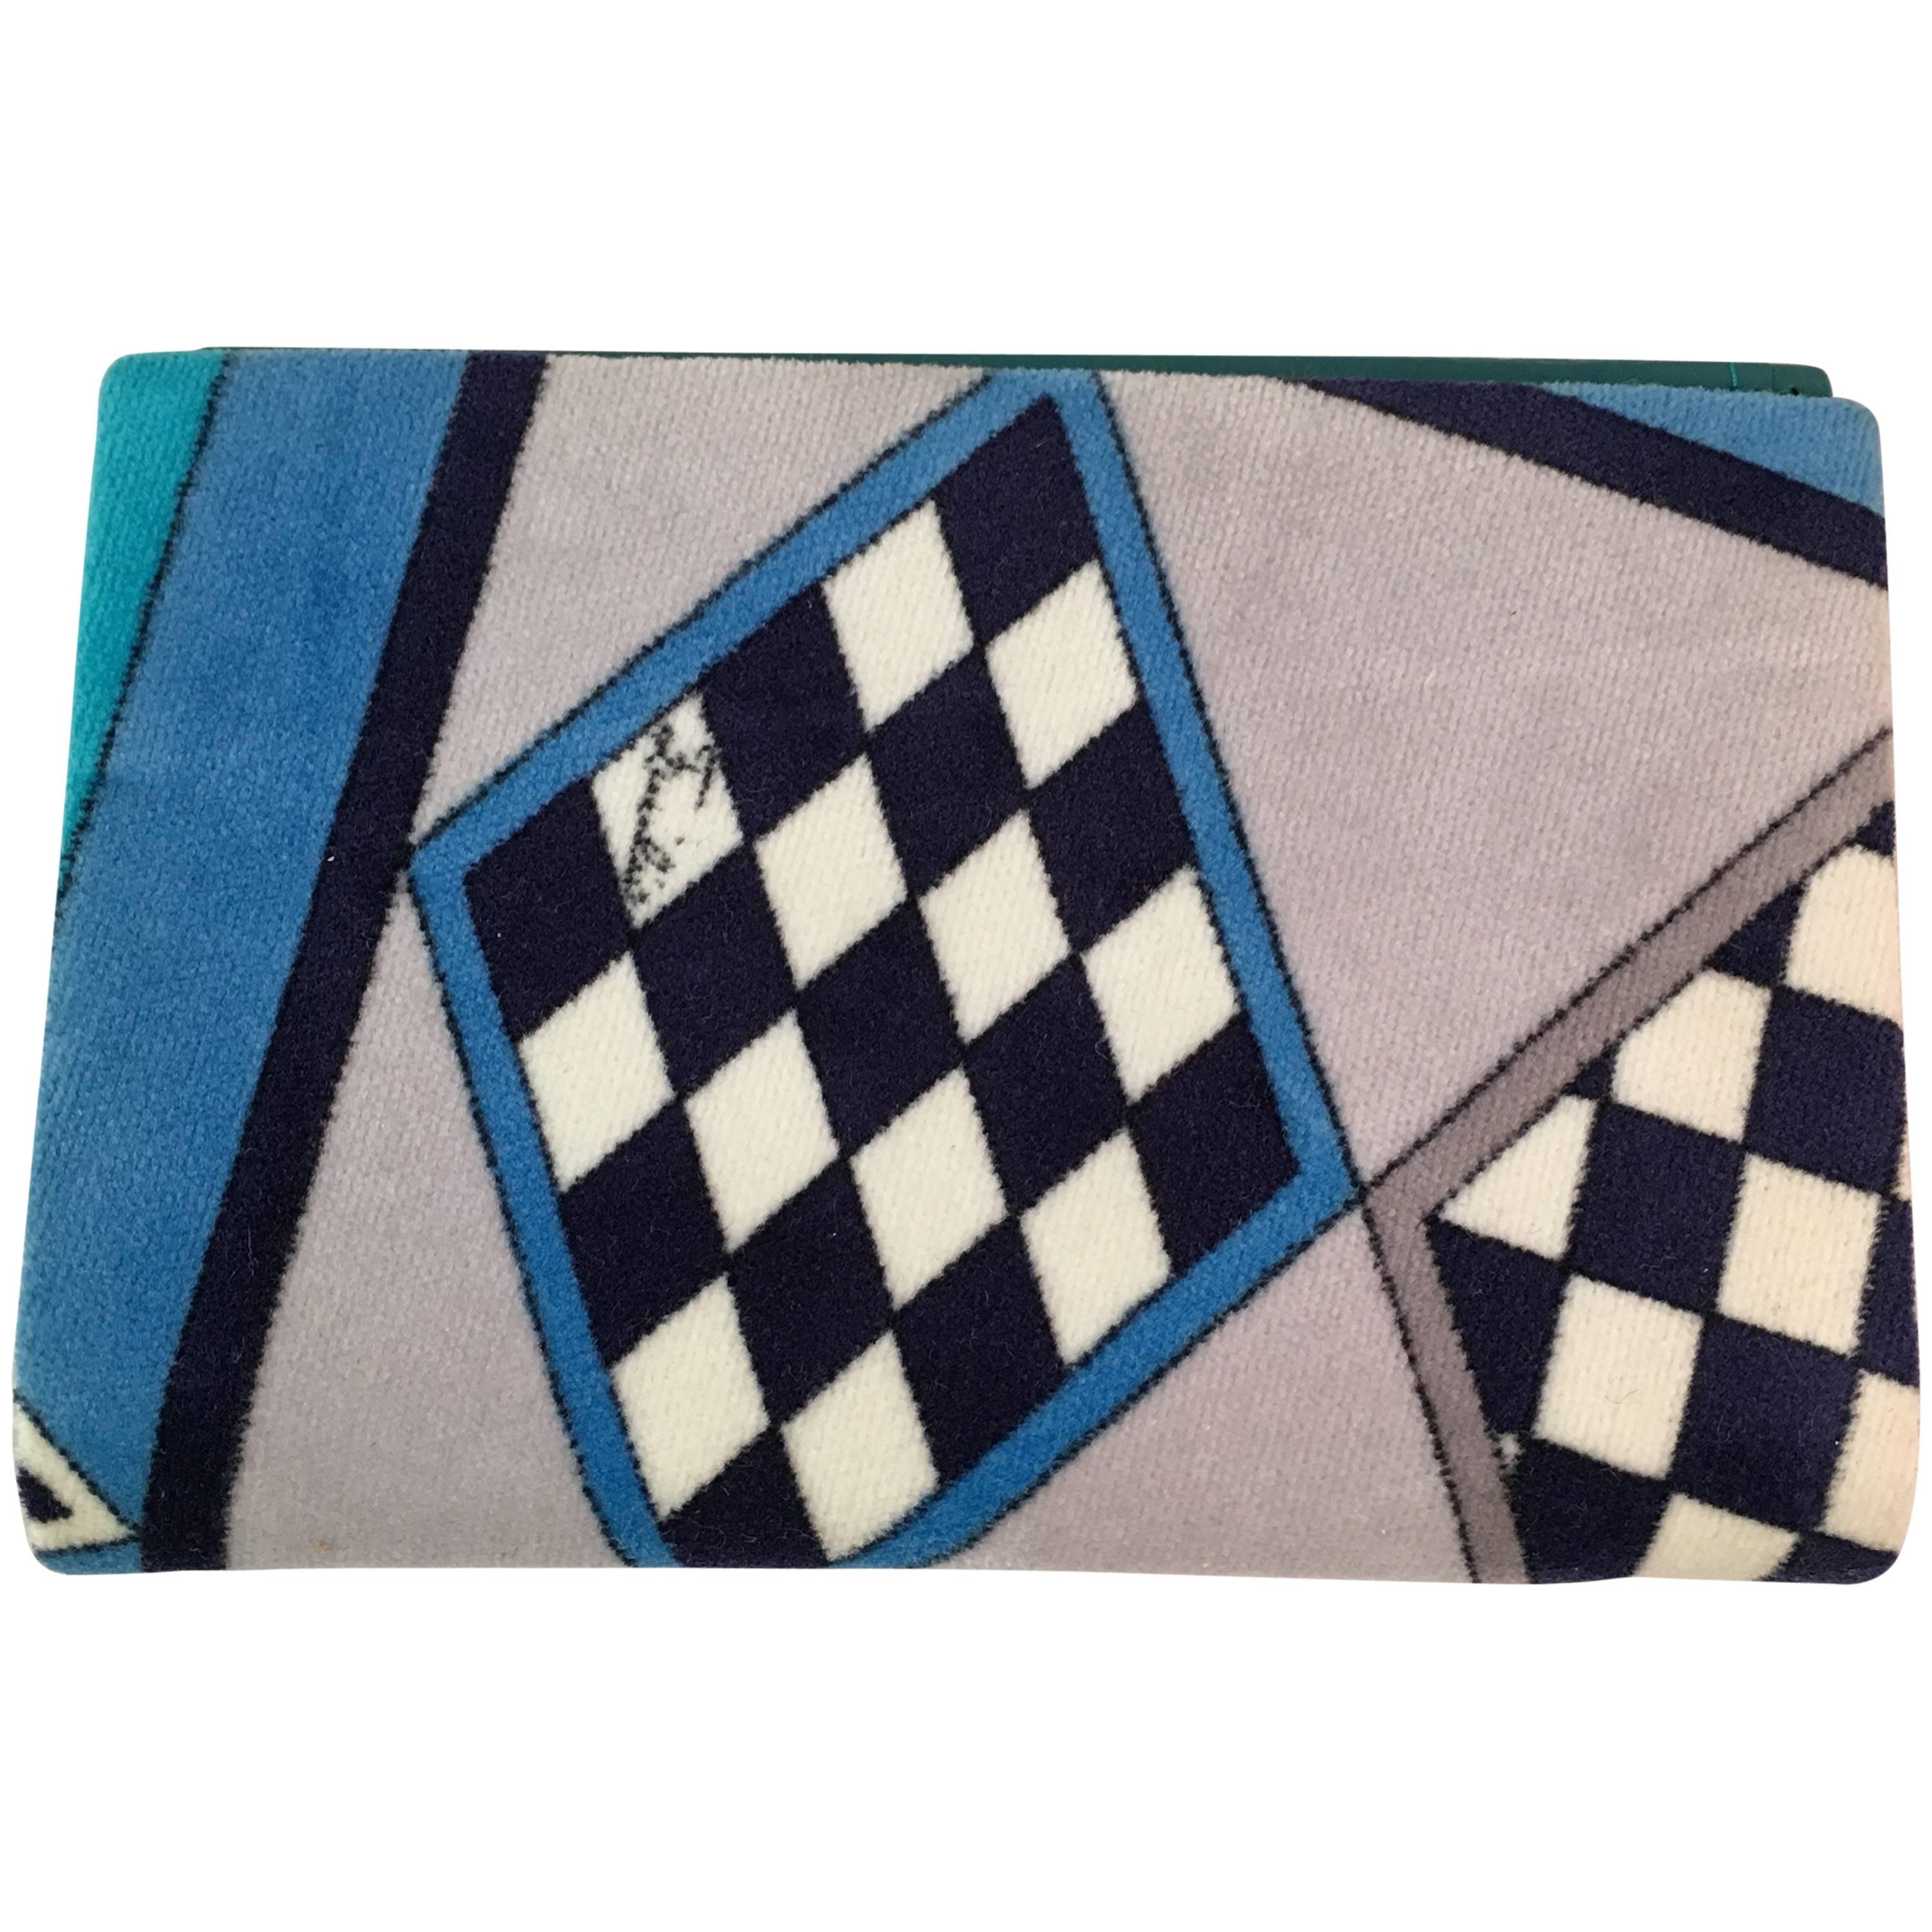 1960s Velvet Geometric Printed Pucci Wallet For Sale